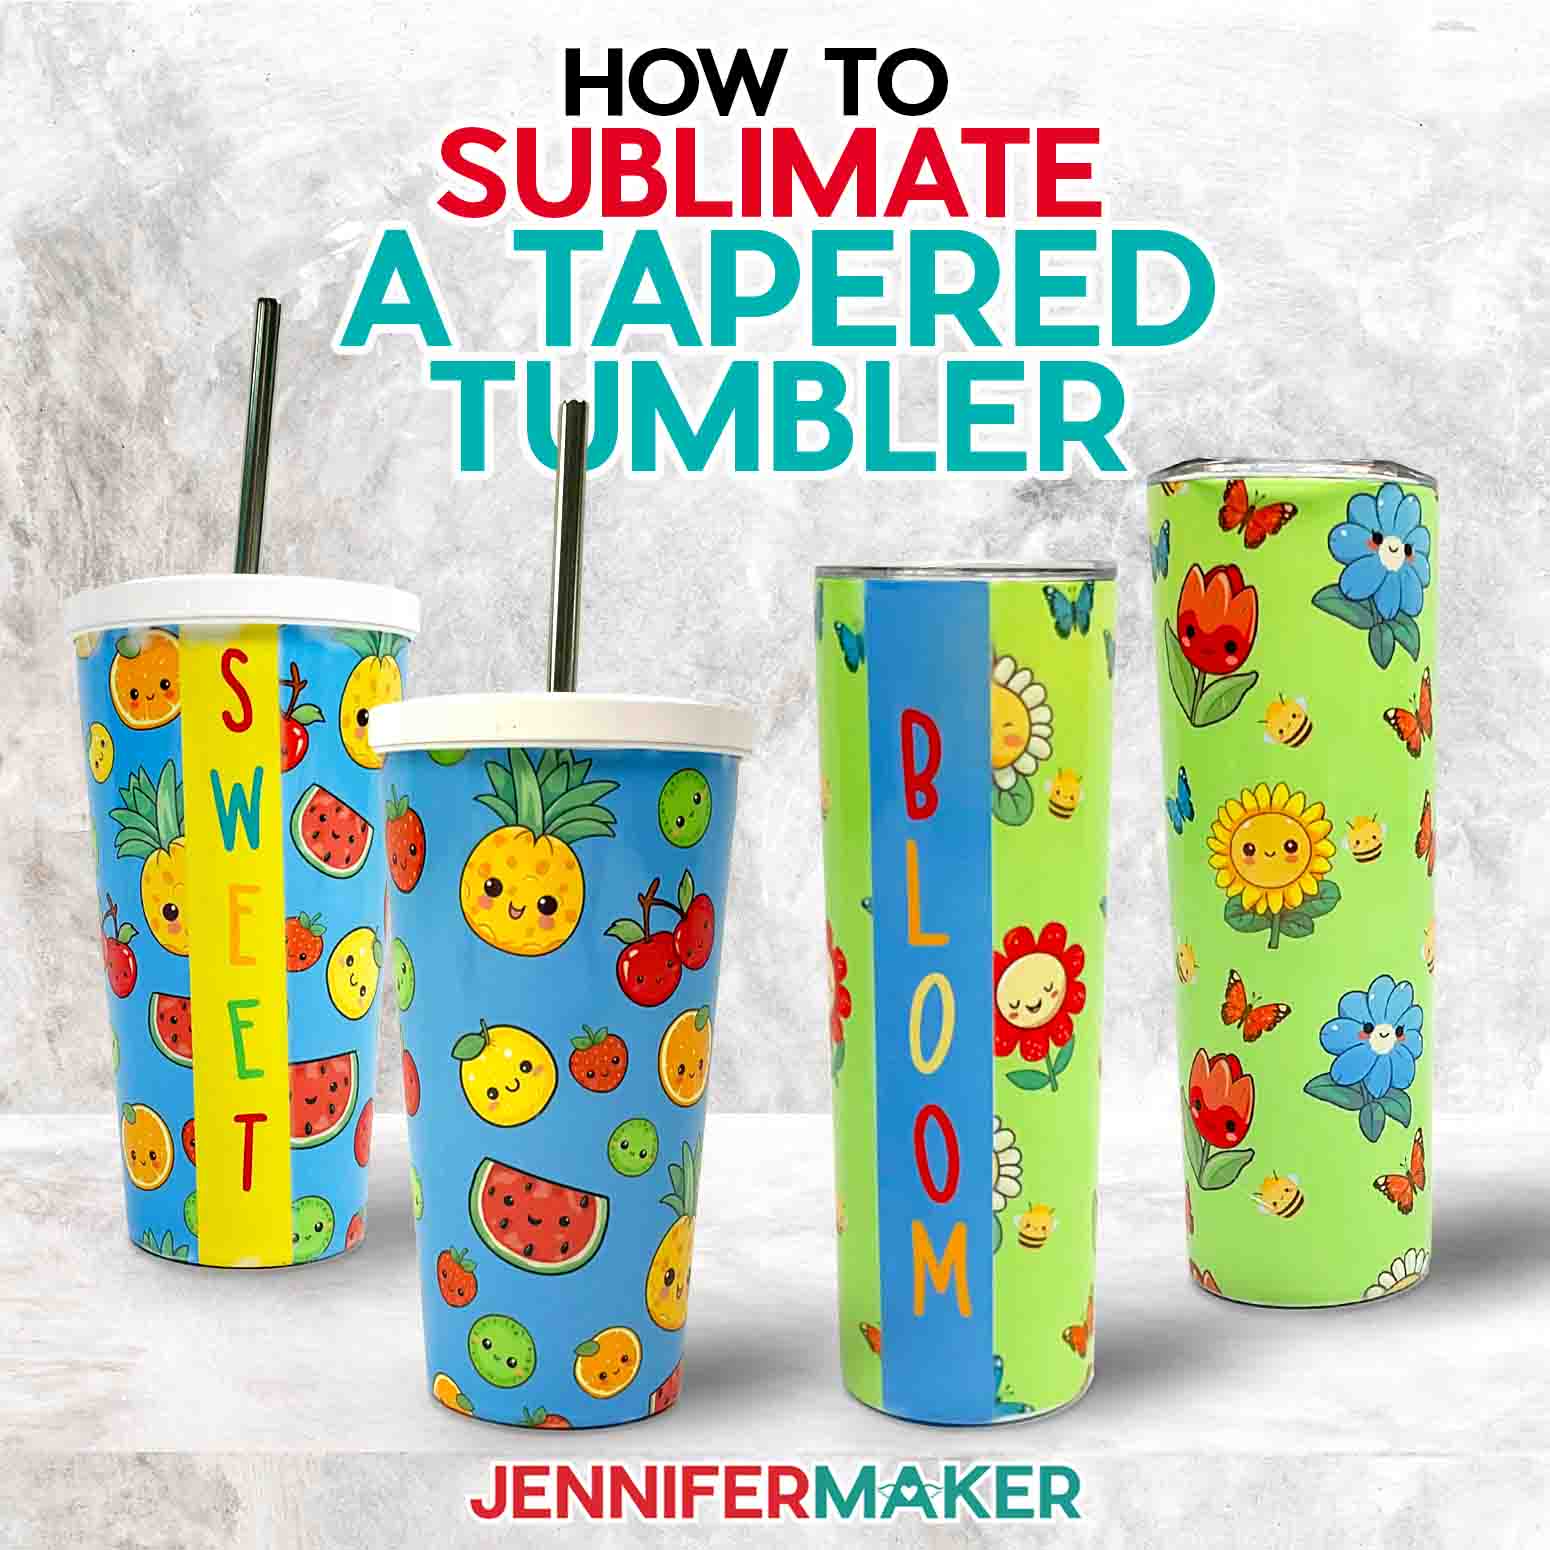 Learn how to sublimate a tapered tumbler! Four tapered drink tumblers with cute Kawaii-inspired fruit and flower designs. Cups have vertical strips reading "Sweet" and "Bloom" to hide seams. Tapered cups can be tricky to sublimate, but Jennifer Maker will show you how in her new tutorial!